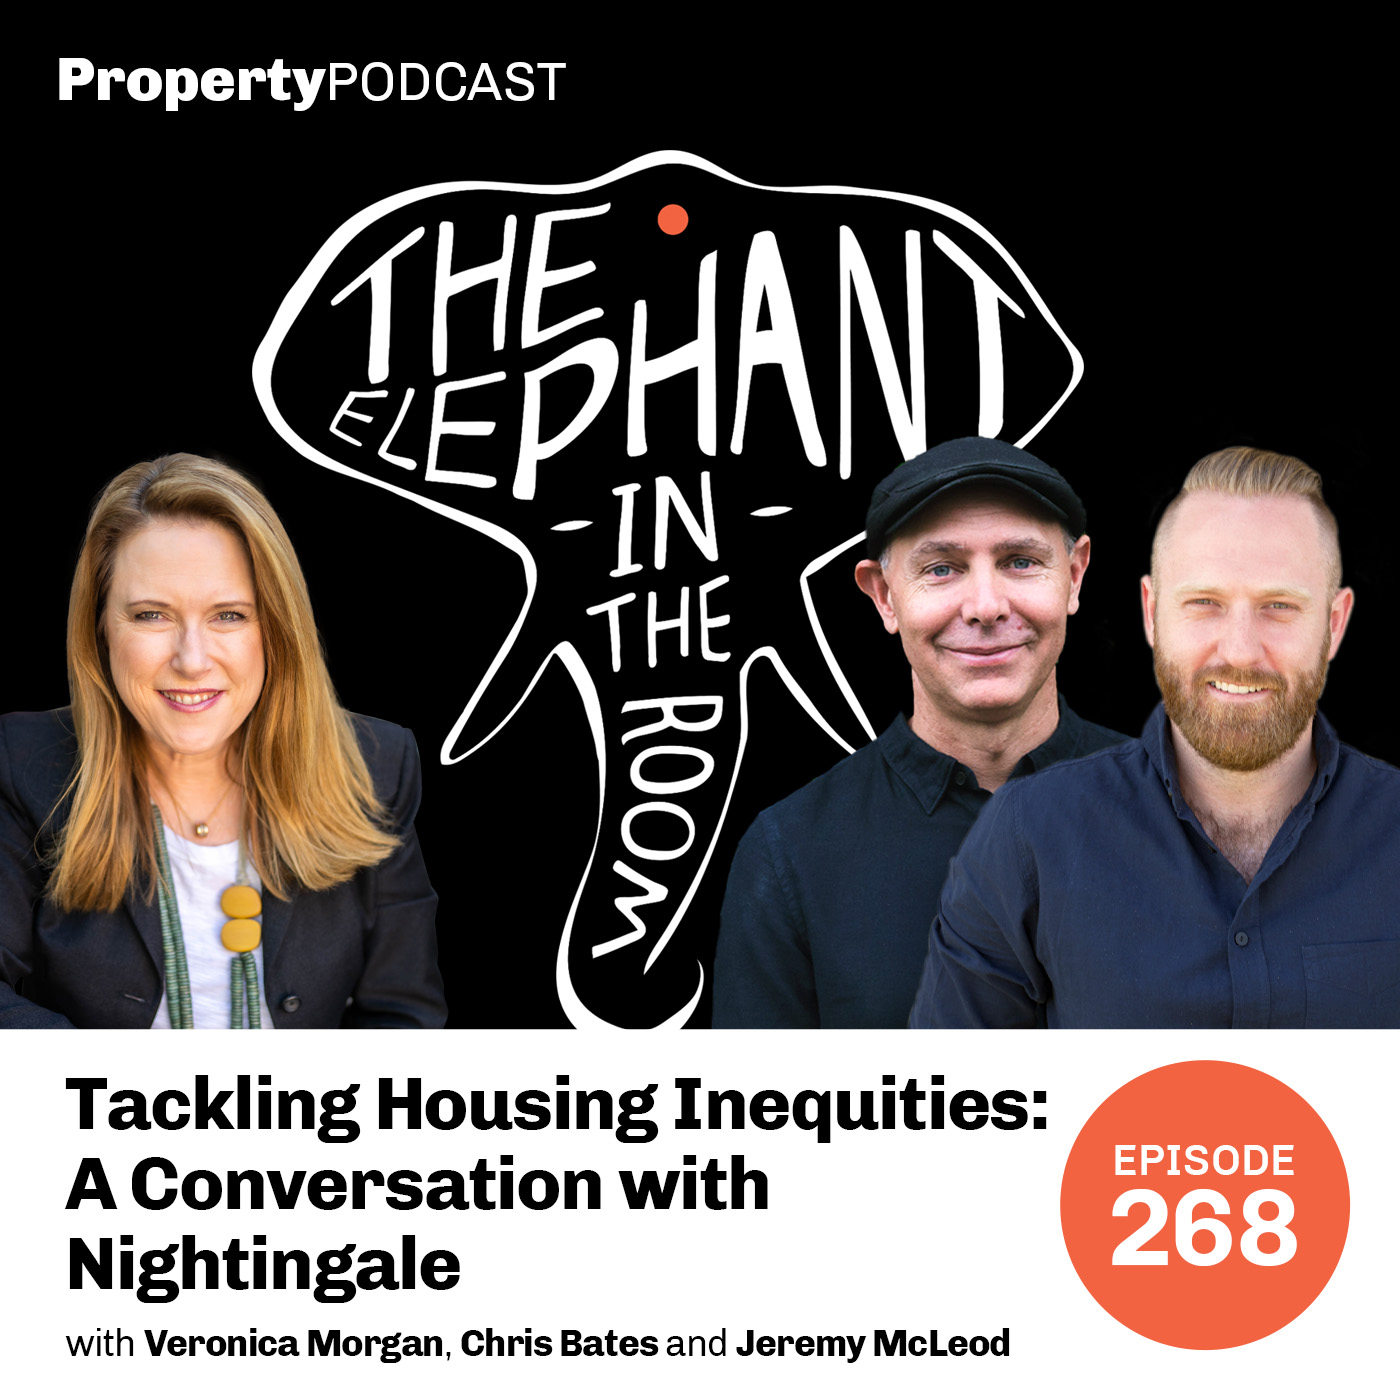 Tackling Housing Inequities: A Conversation with Nightingale